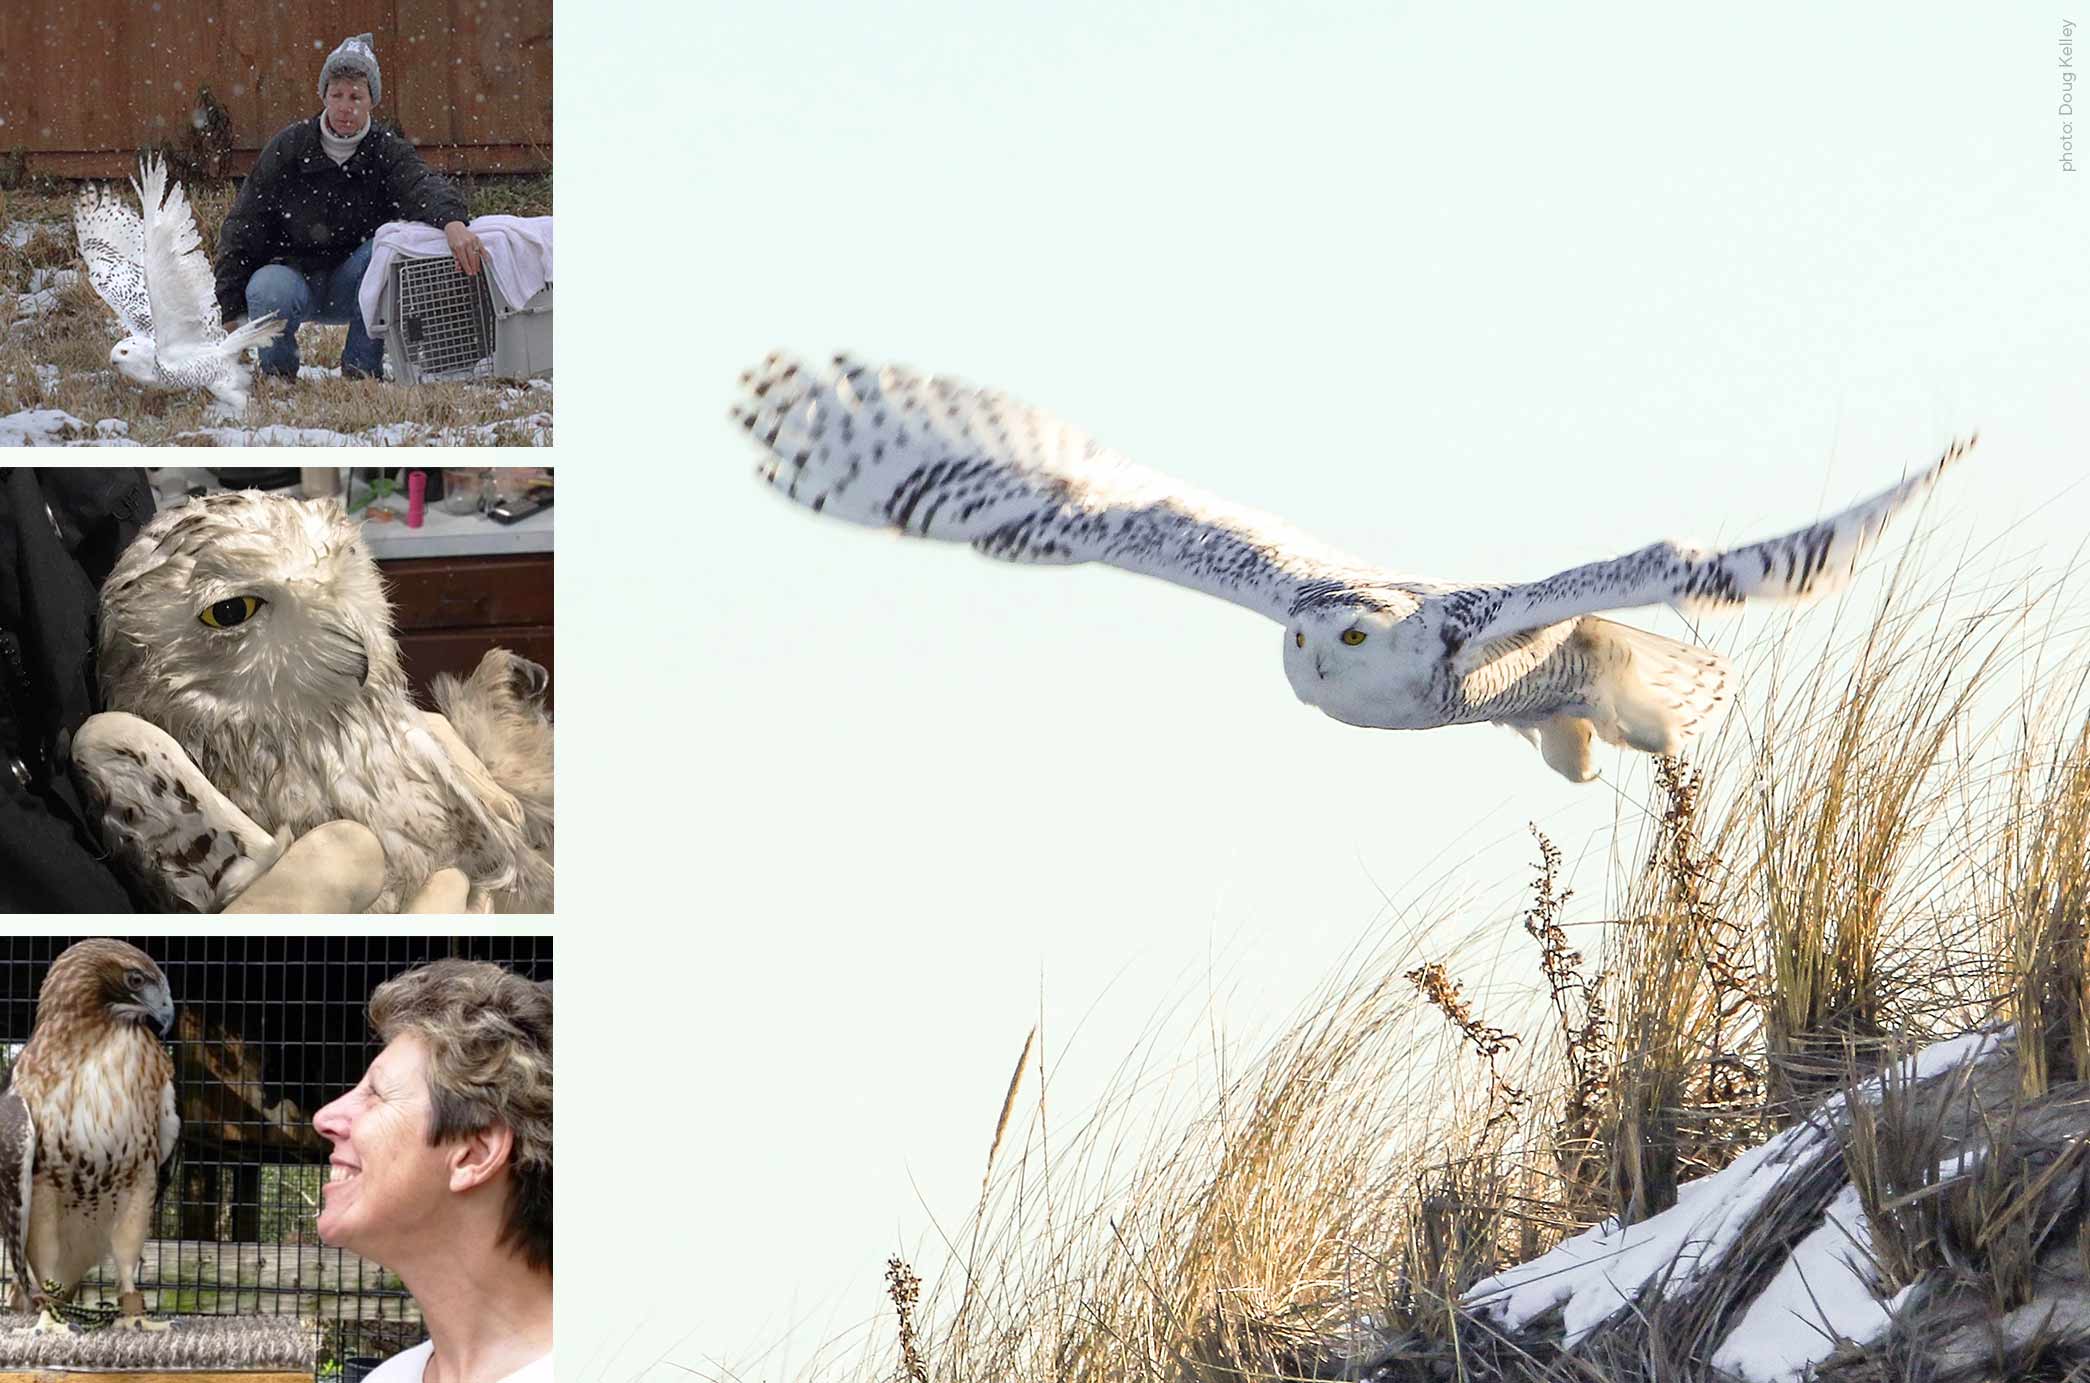 Photo collage of an Owl in a wildlife rehabilitation center and flying away after being released